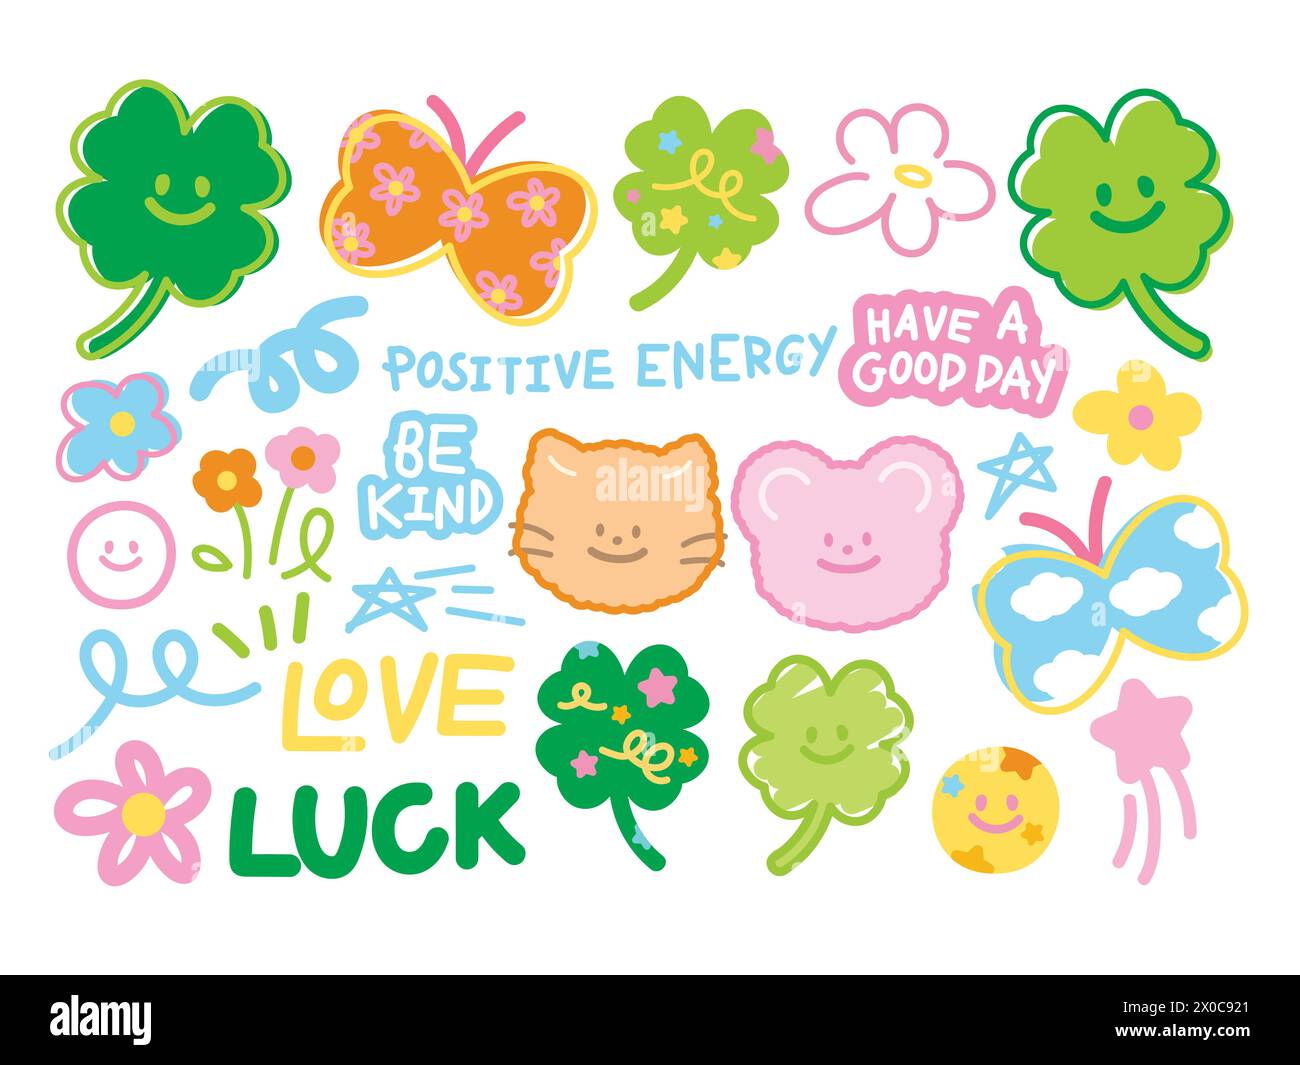 Cute illustrations of clover leaf, flowers, butterfly, cat, teddy bear, positive energy for lucky icon, stickers, card print, icon, logo, cartoon Stock Vector